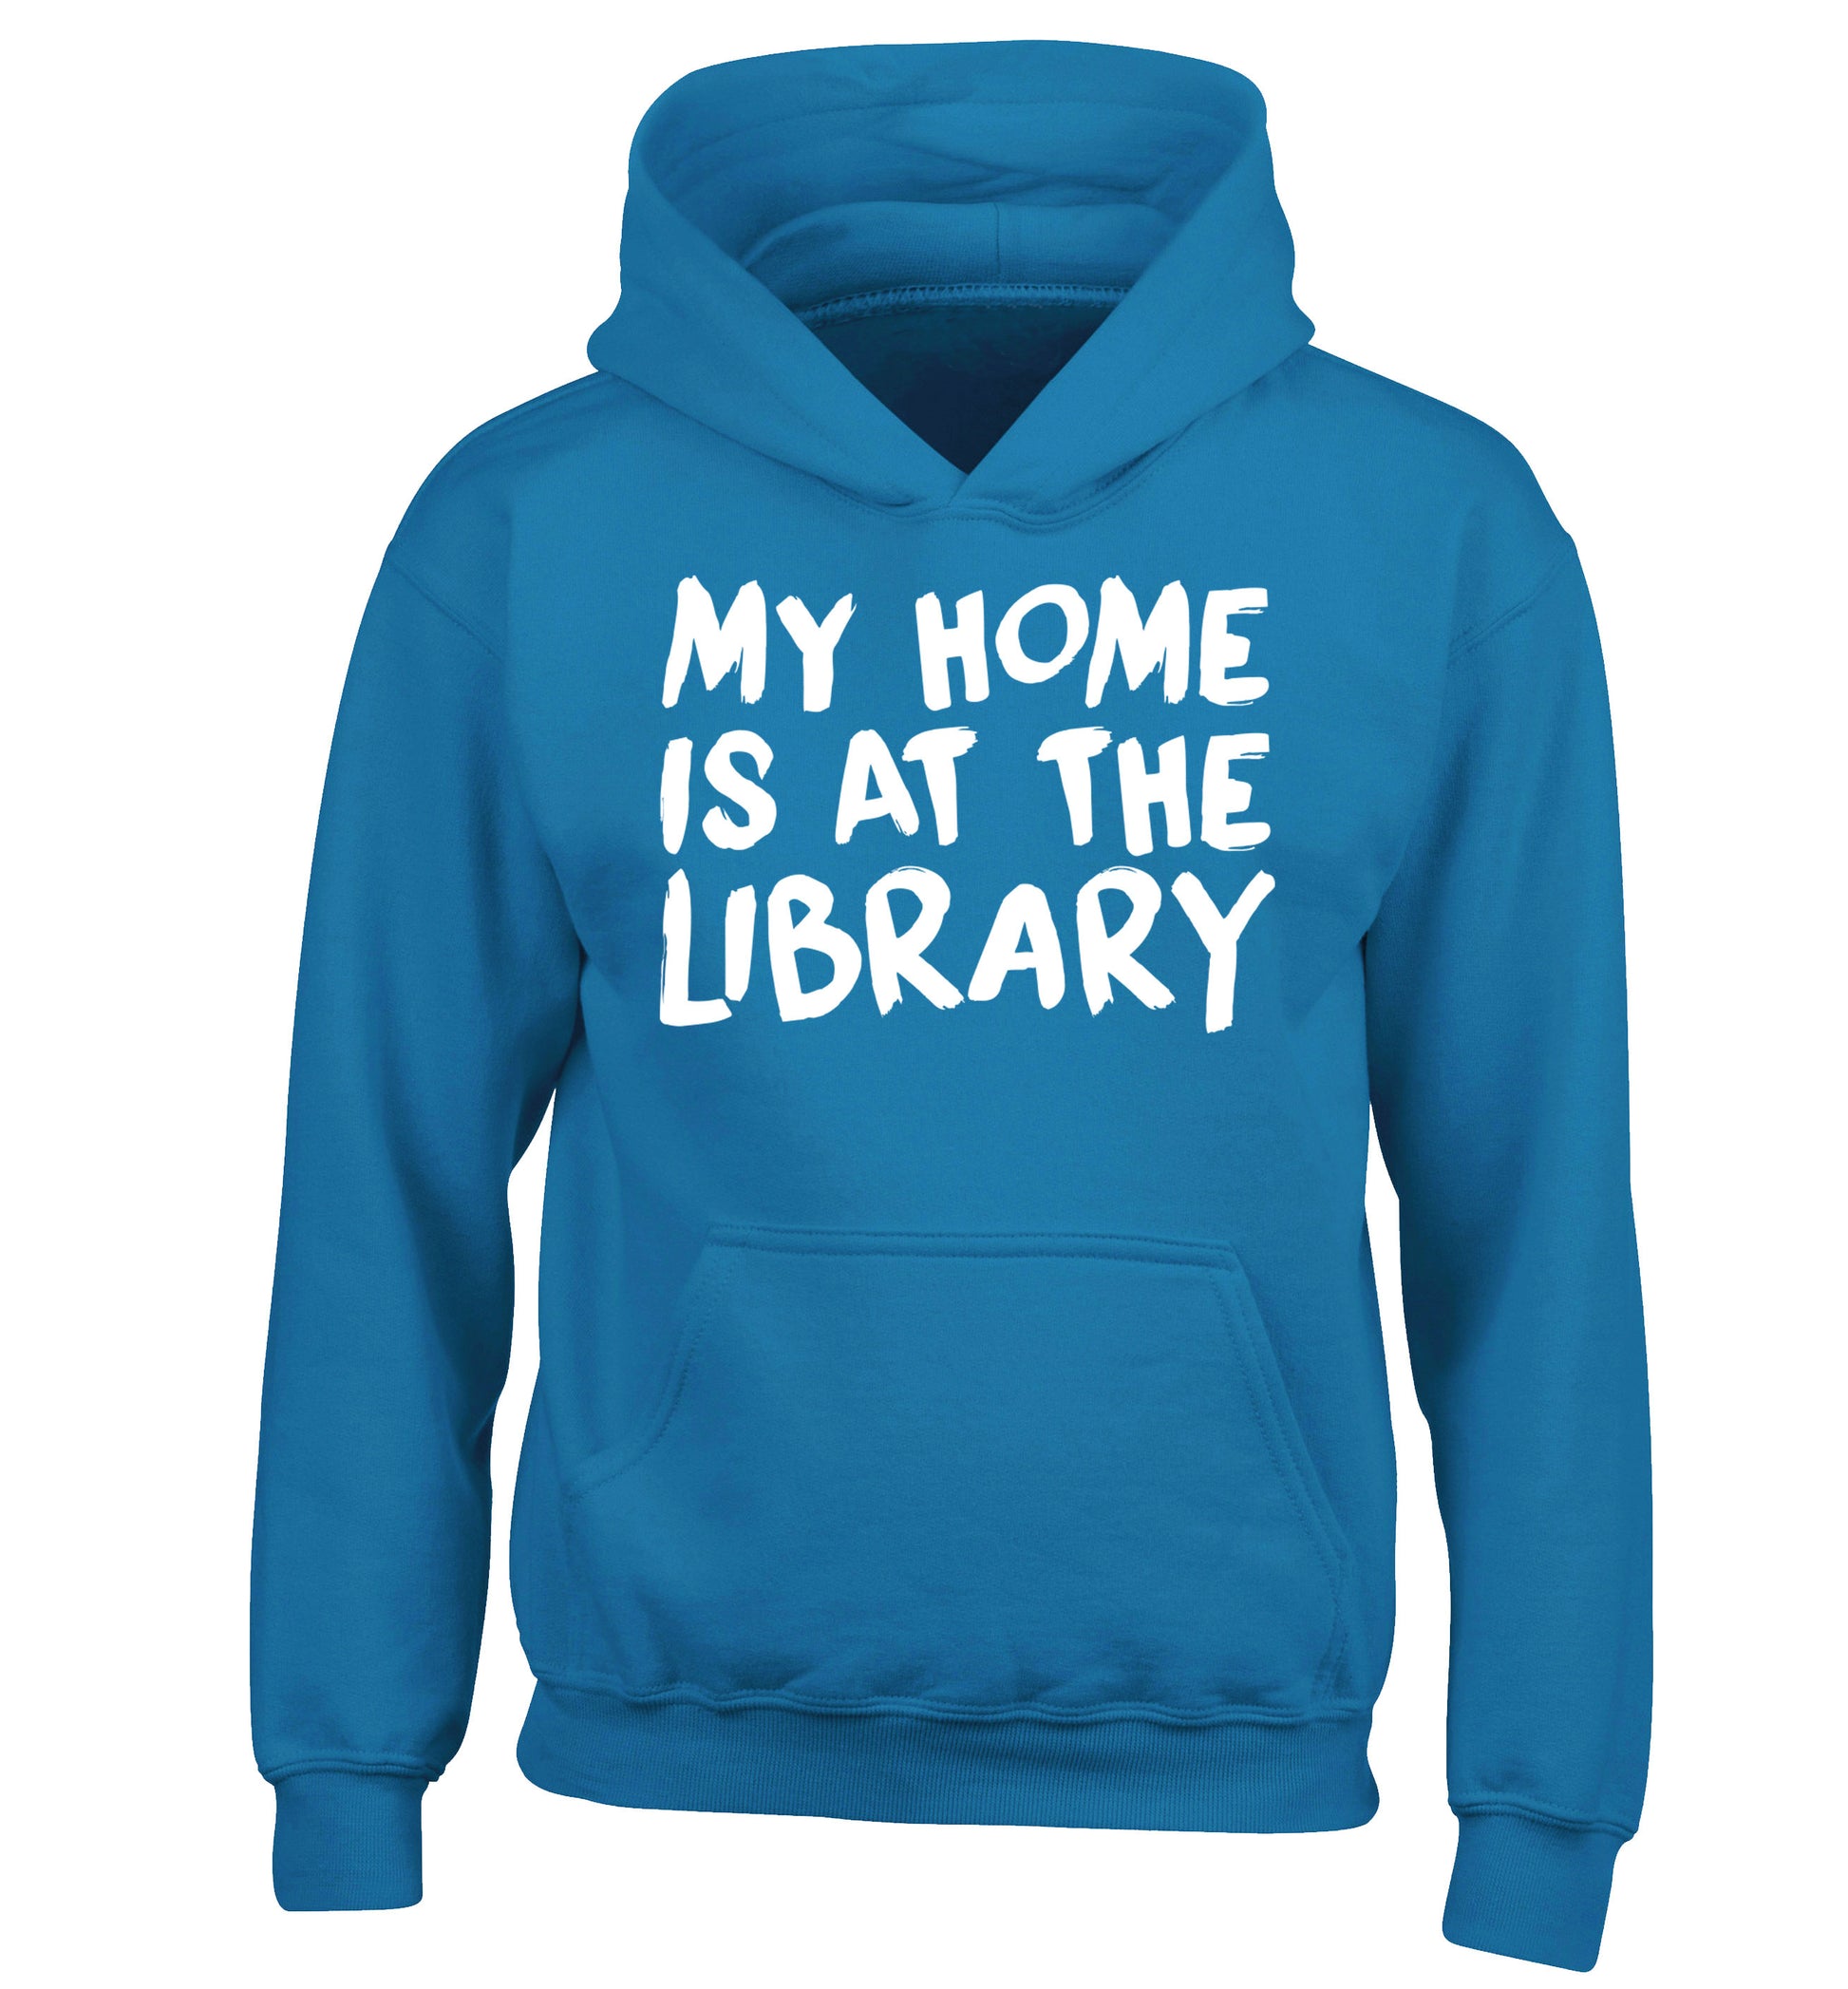 My home is at the library children's blue hoodie 12-14 Years